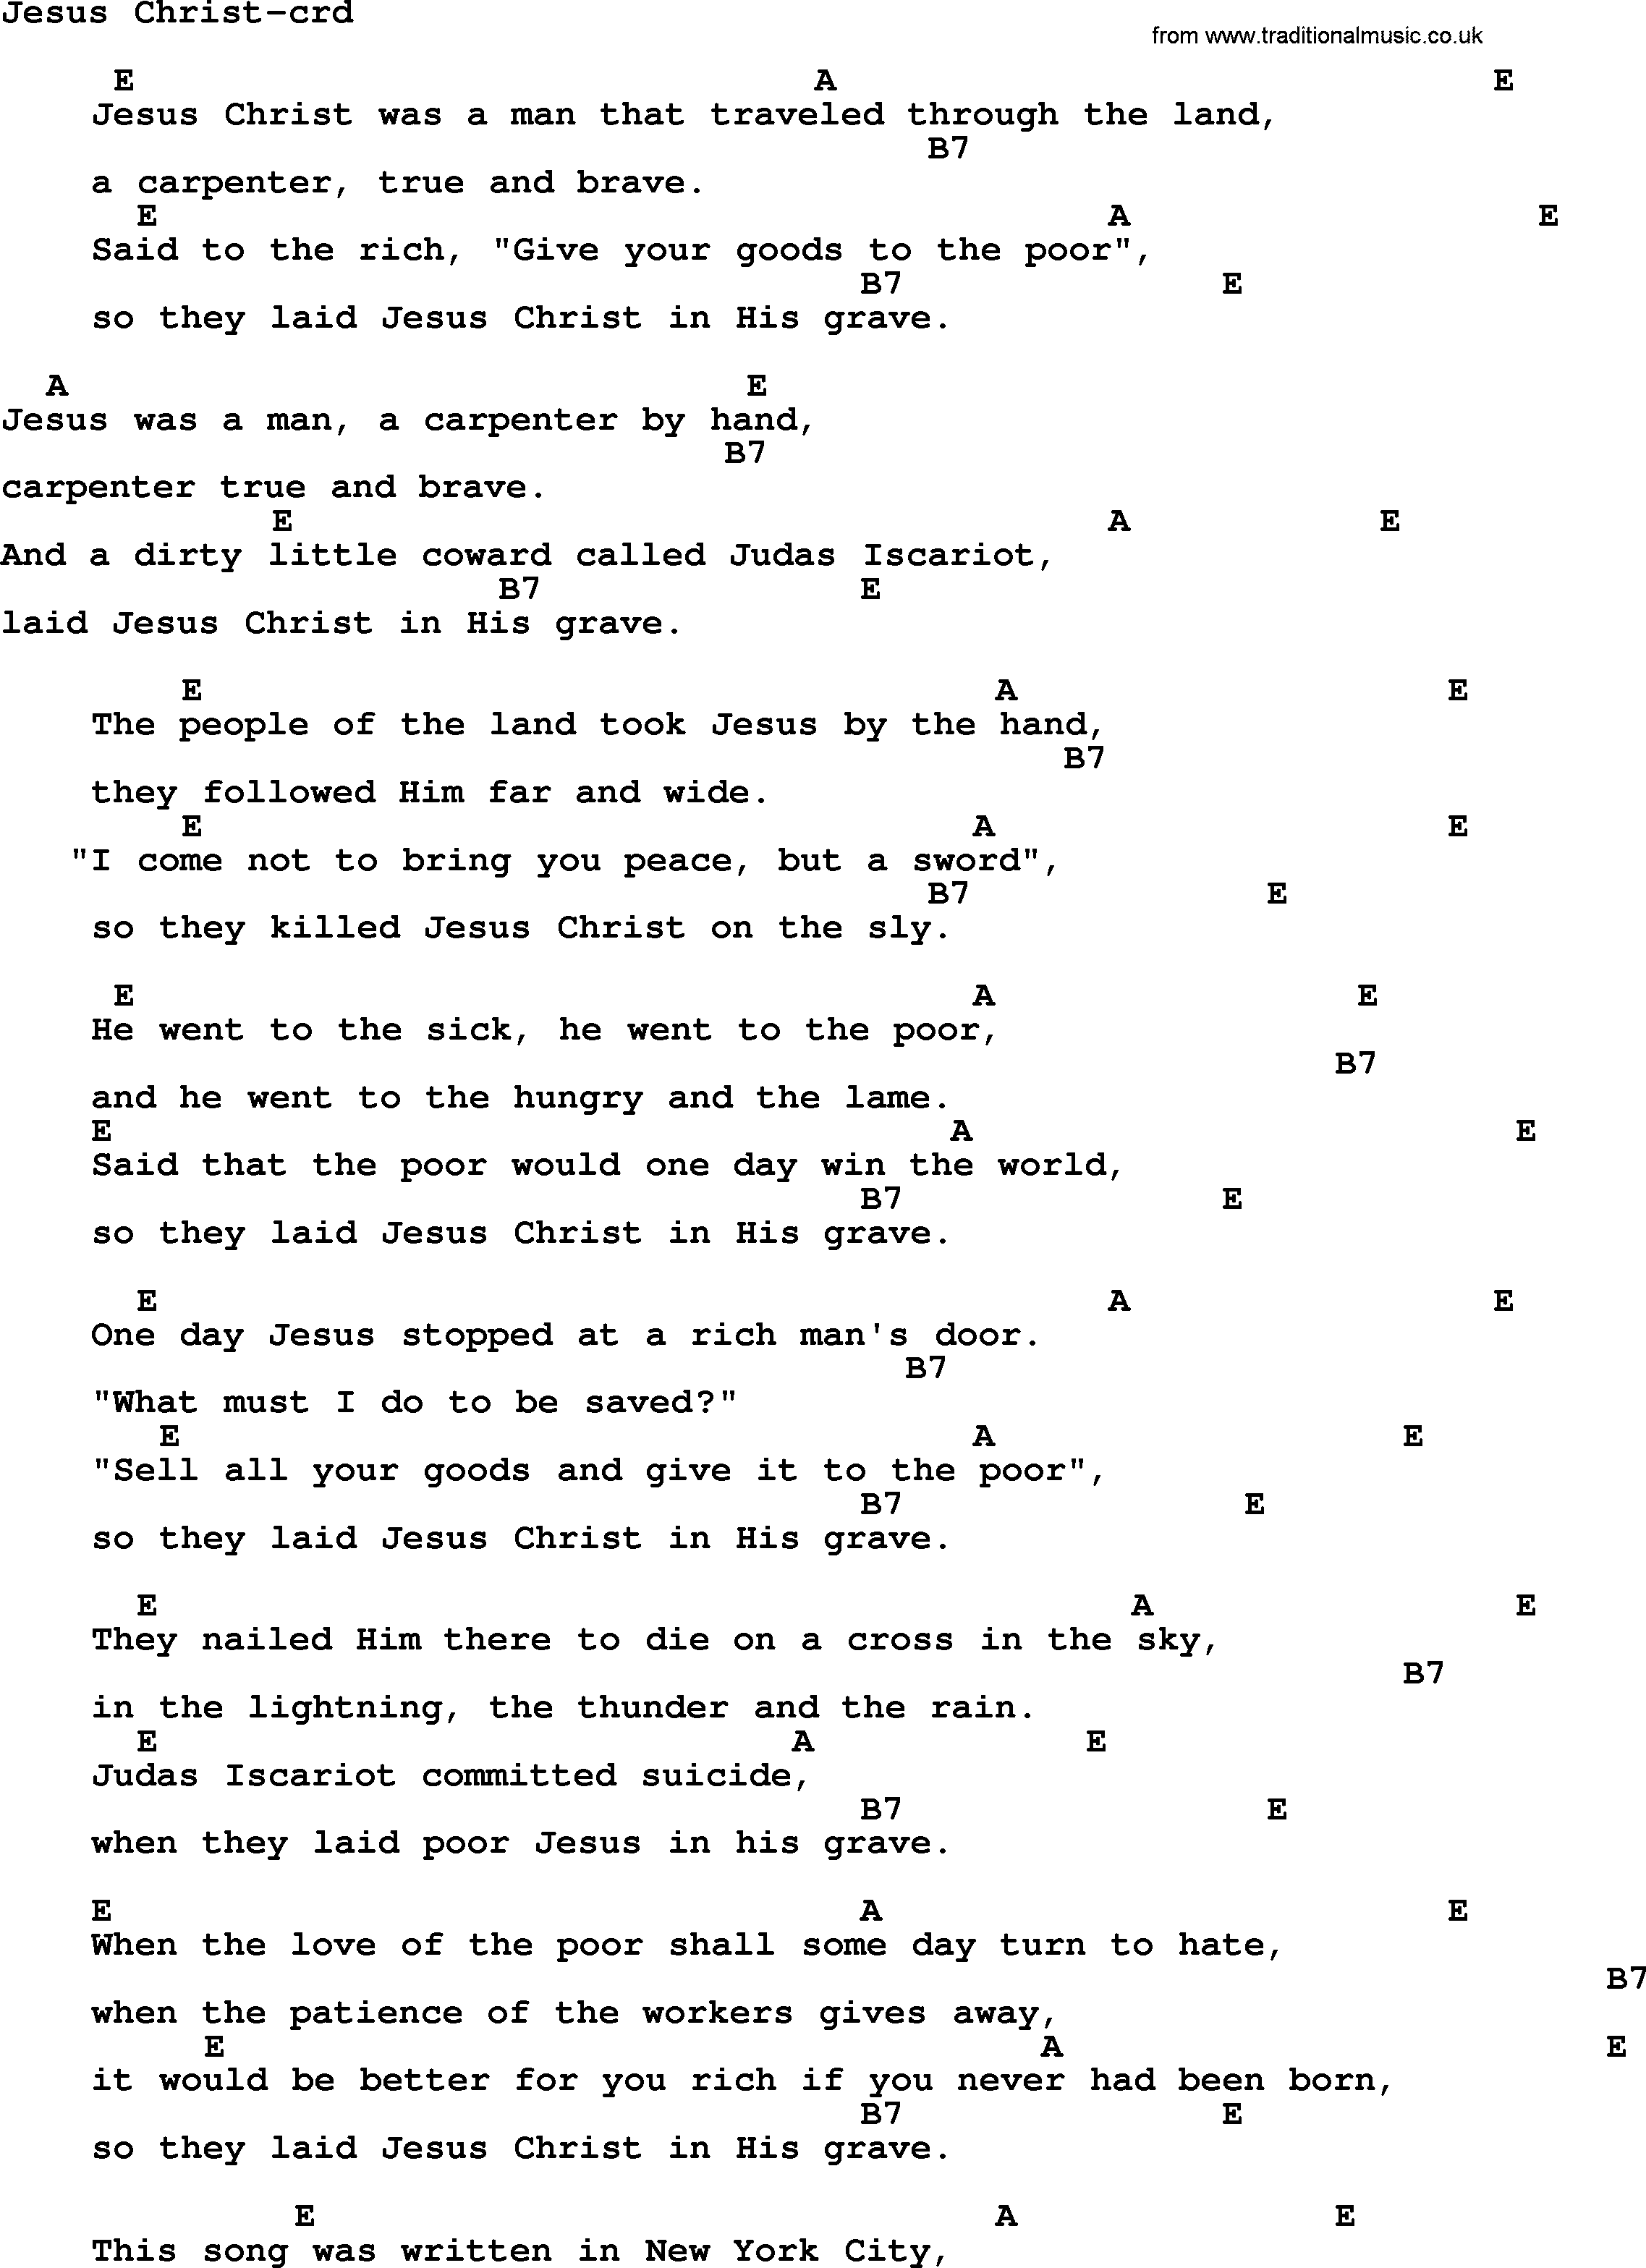 Woody Guthrie song Jesus Christ lyrics and chords